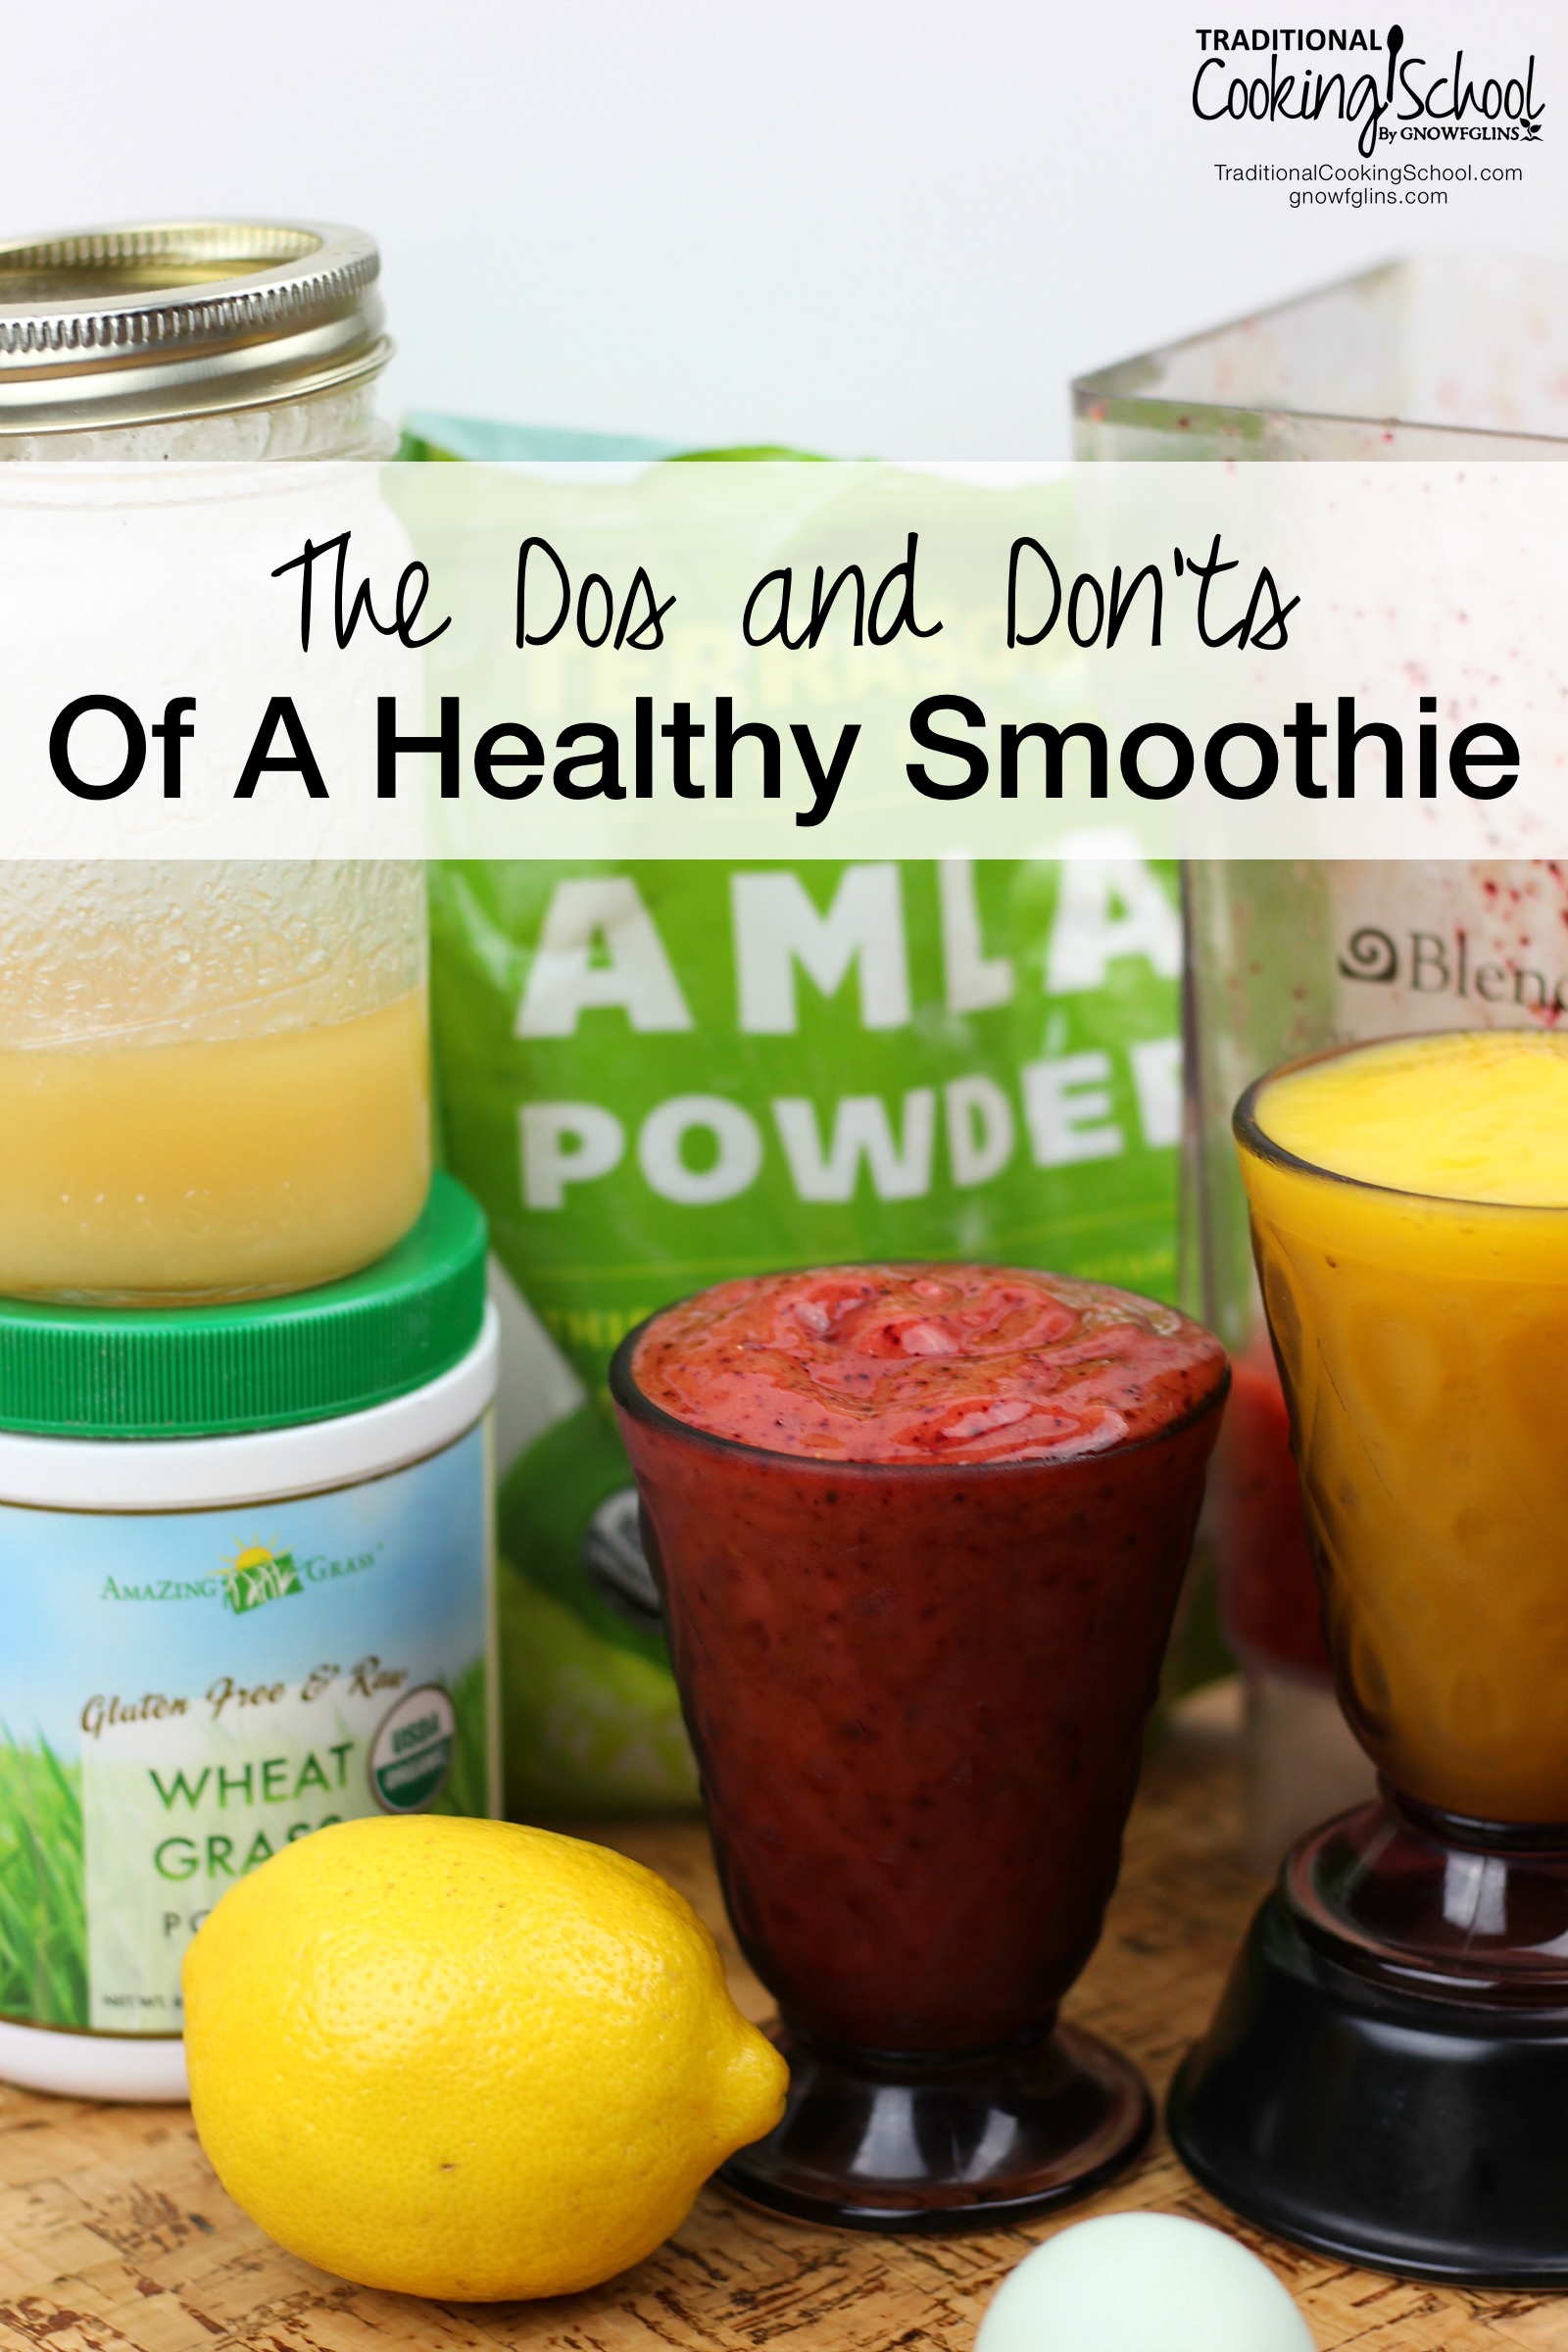 The Dos and Don'ts Of A Healthy Smoothie | Smoothies used to seem so easy! Then the green smoothie was introduced. Then coconut water and collagen. Yet these superfoods may not be all that they're cracked up to be. So what makes a smoothie a truly healthy snack? Here's how to make a healthy smoothie -- some easy DOs and DON'Ts to make your smoothies nourishing, beyond any doubt. | TraditionalCookingSchool.com